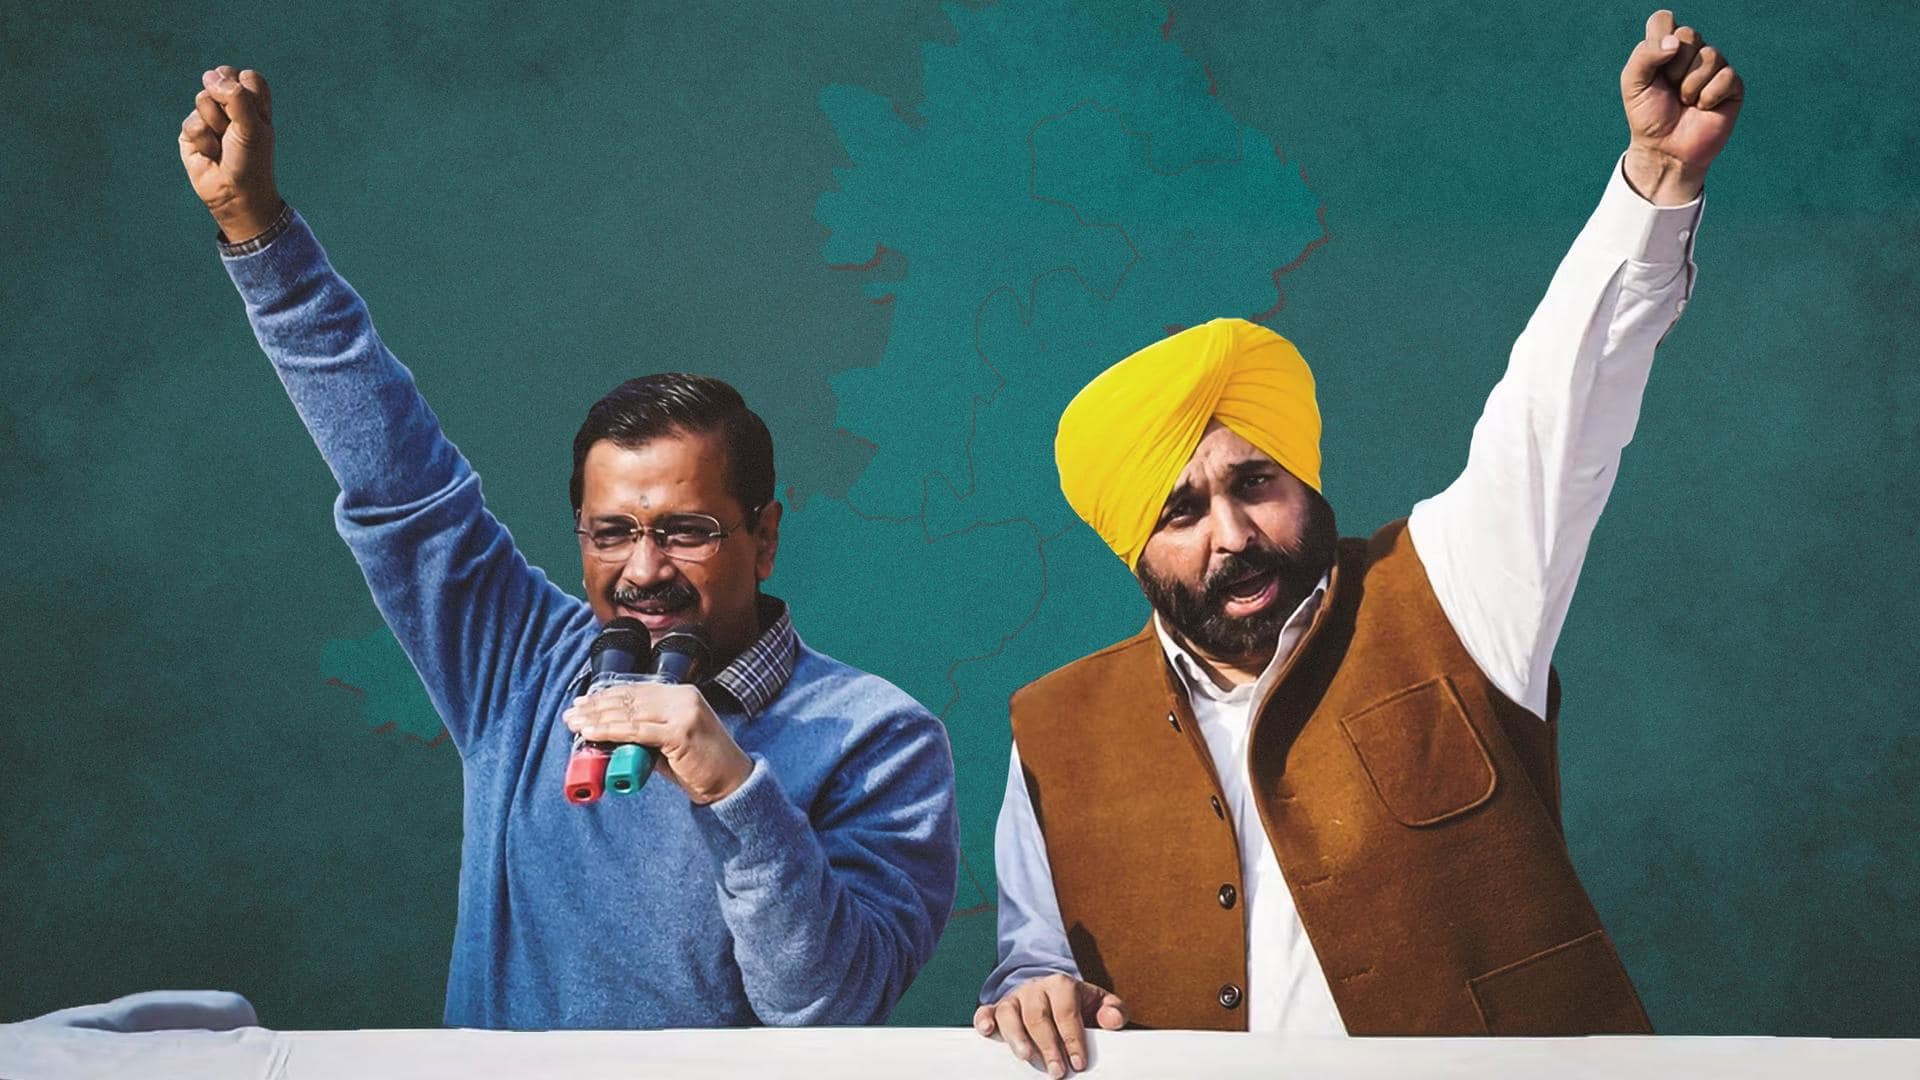 Bypolls results: AAP wins Jalandhar parliamentary seat with huge margin